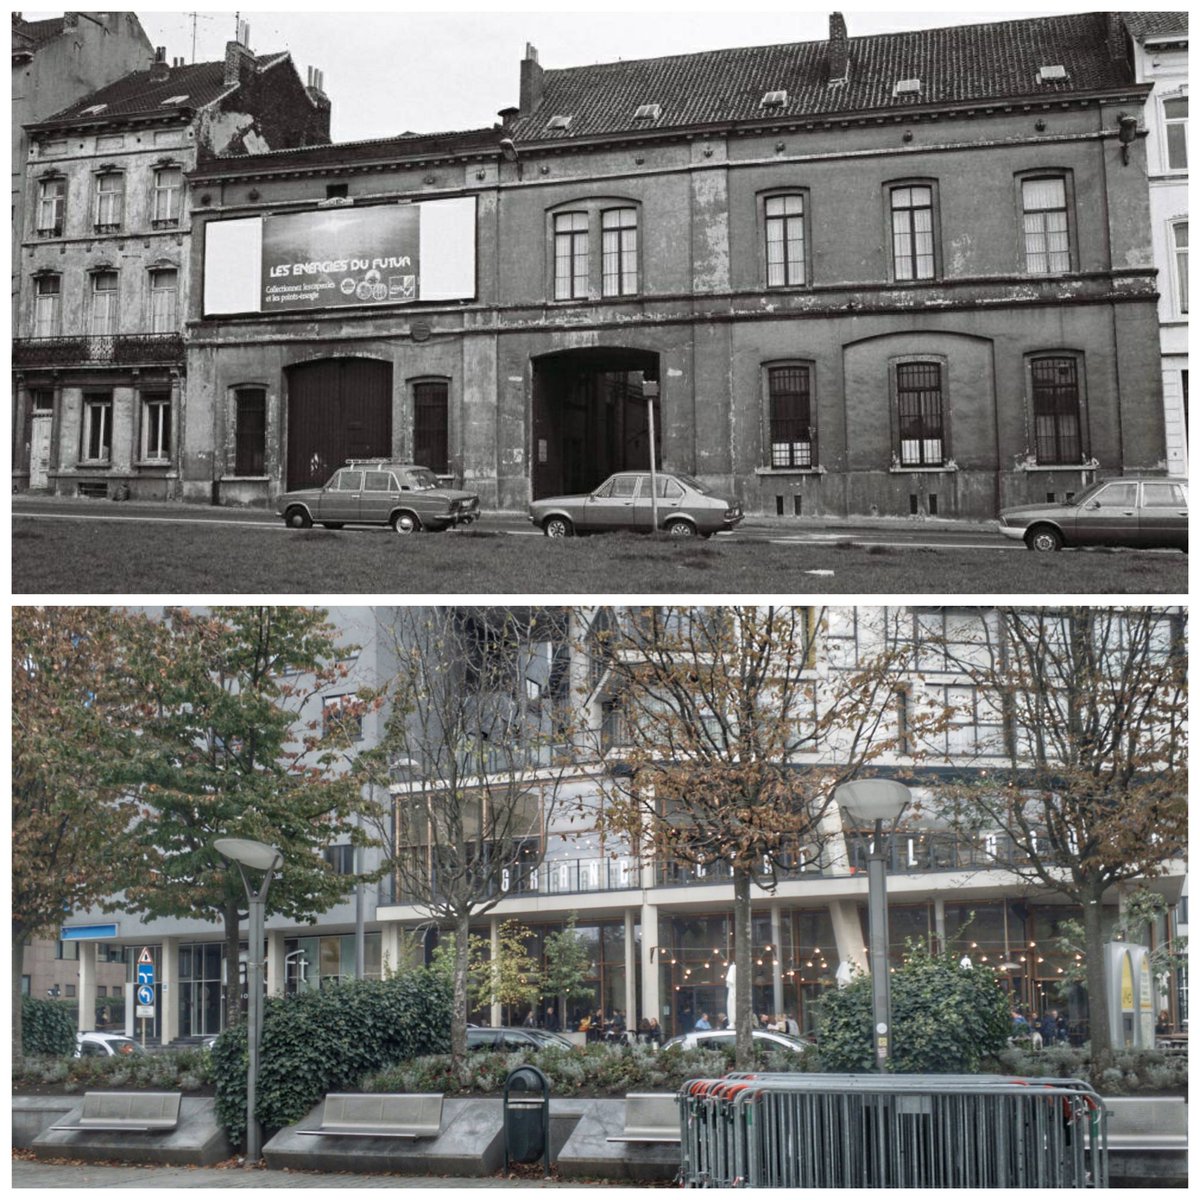 Top, rue Juste Lipse, 1980. Bottom, east side of place Jean Rey today. Exact same place. Most of rue Juste Lipse, to the left, is under today's Juste Lipse building. They kept the snazzy name for the new road cut between rue Froissart and Jean Rey, if you get me. Confusing.